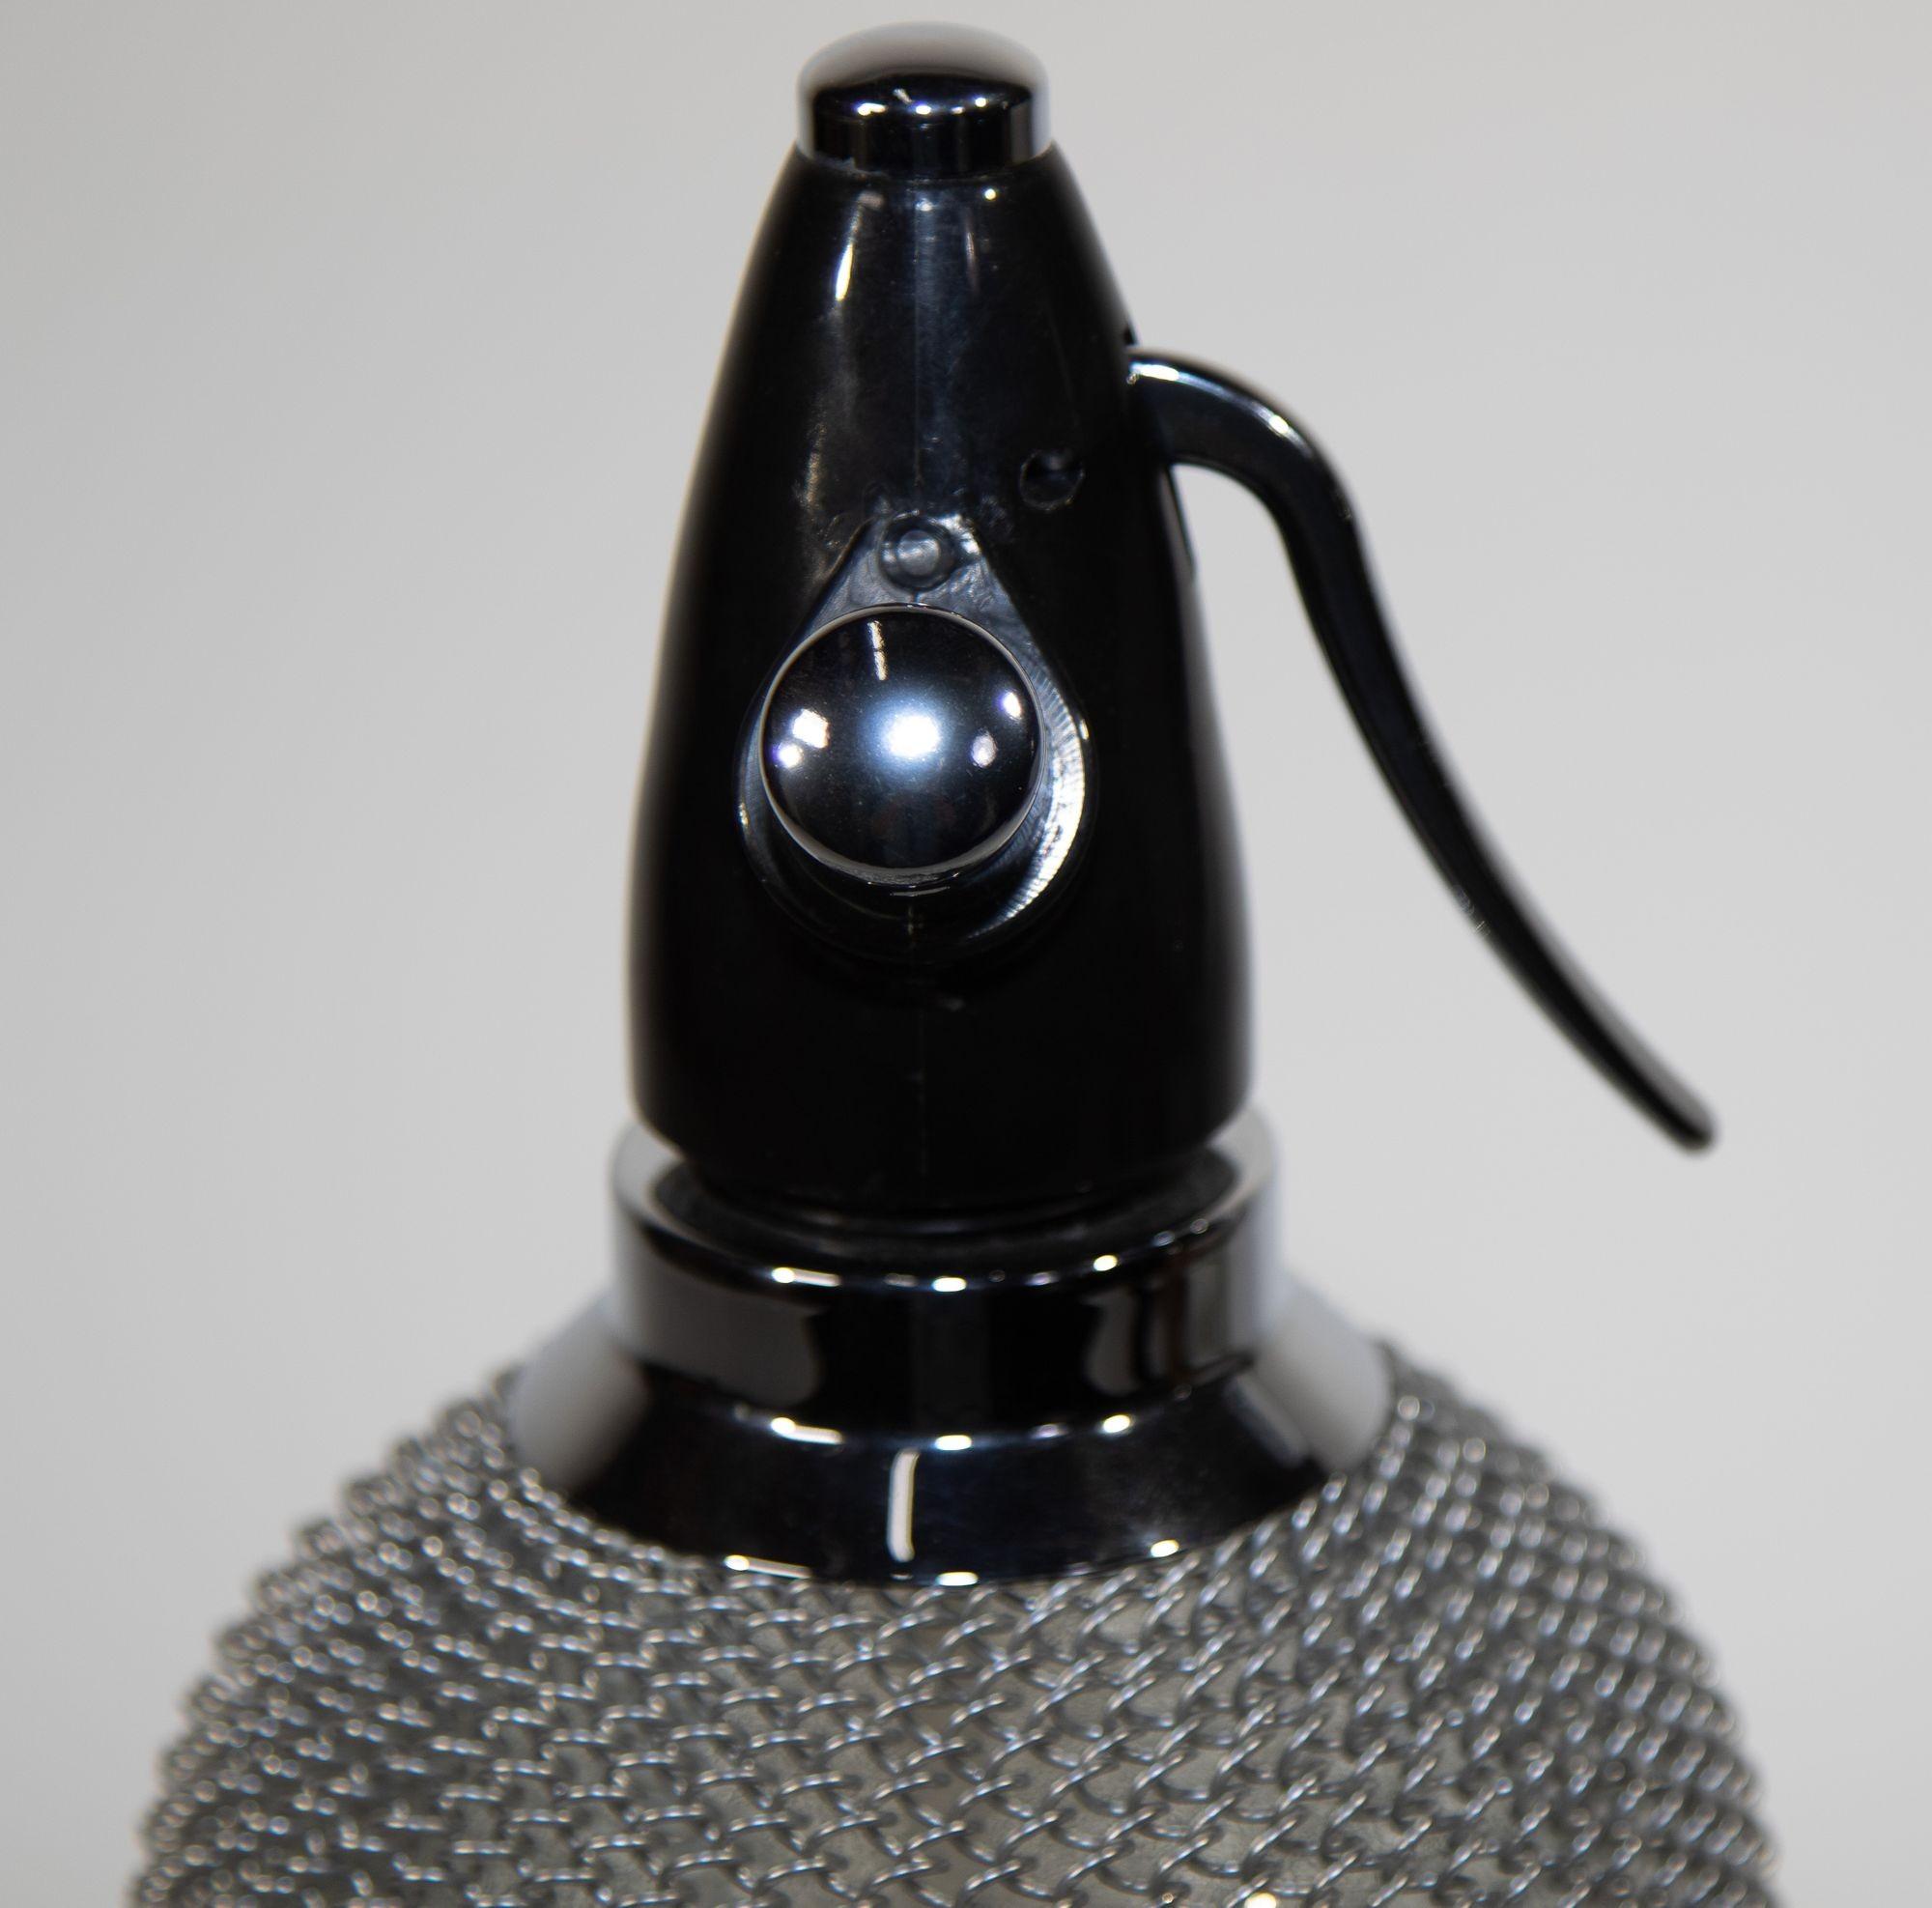 European Vintage Classic Soda Siphon Seltzer Glass Bottle with Wire Mesh For Sale